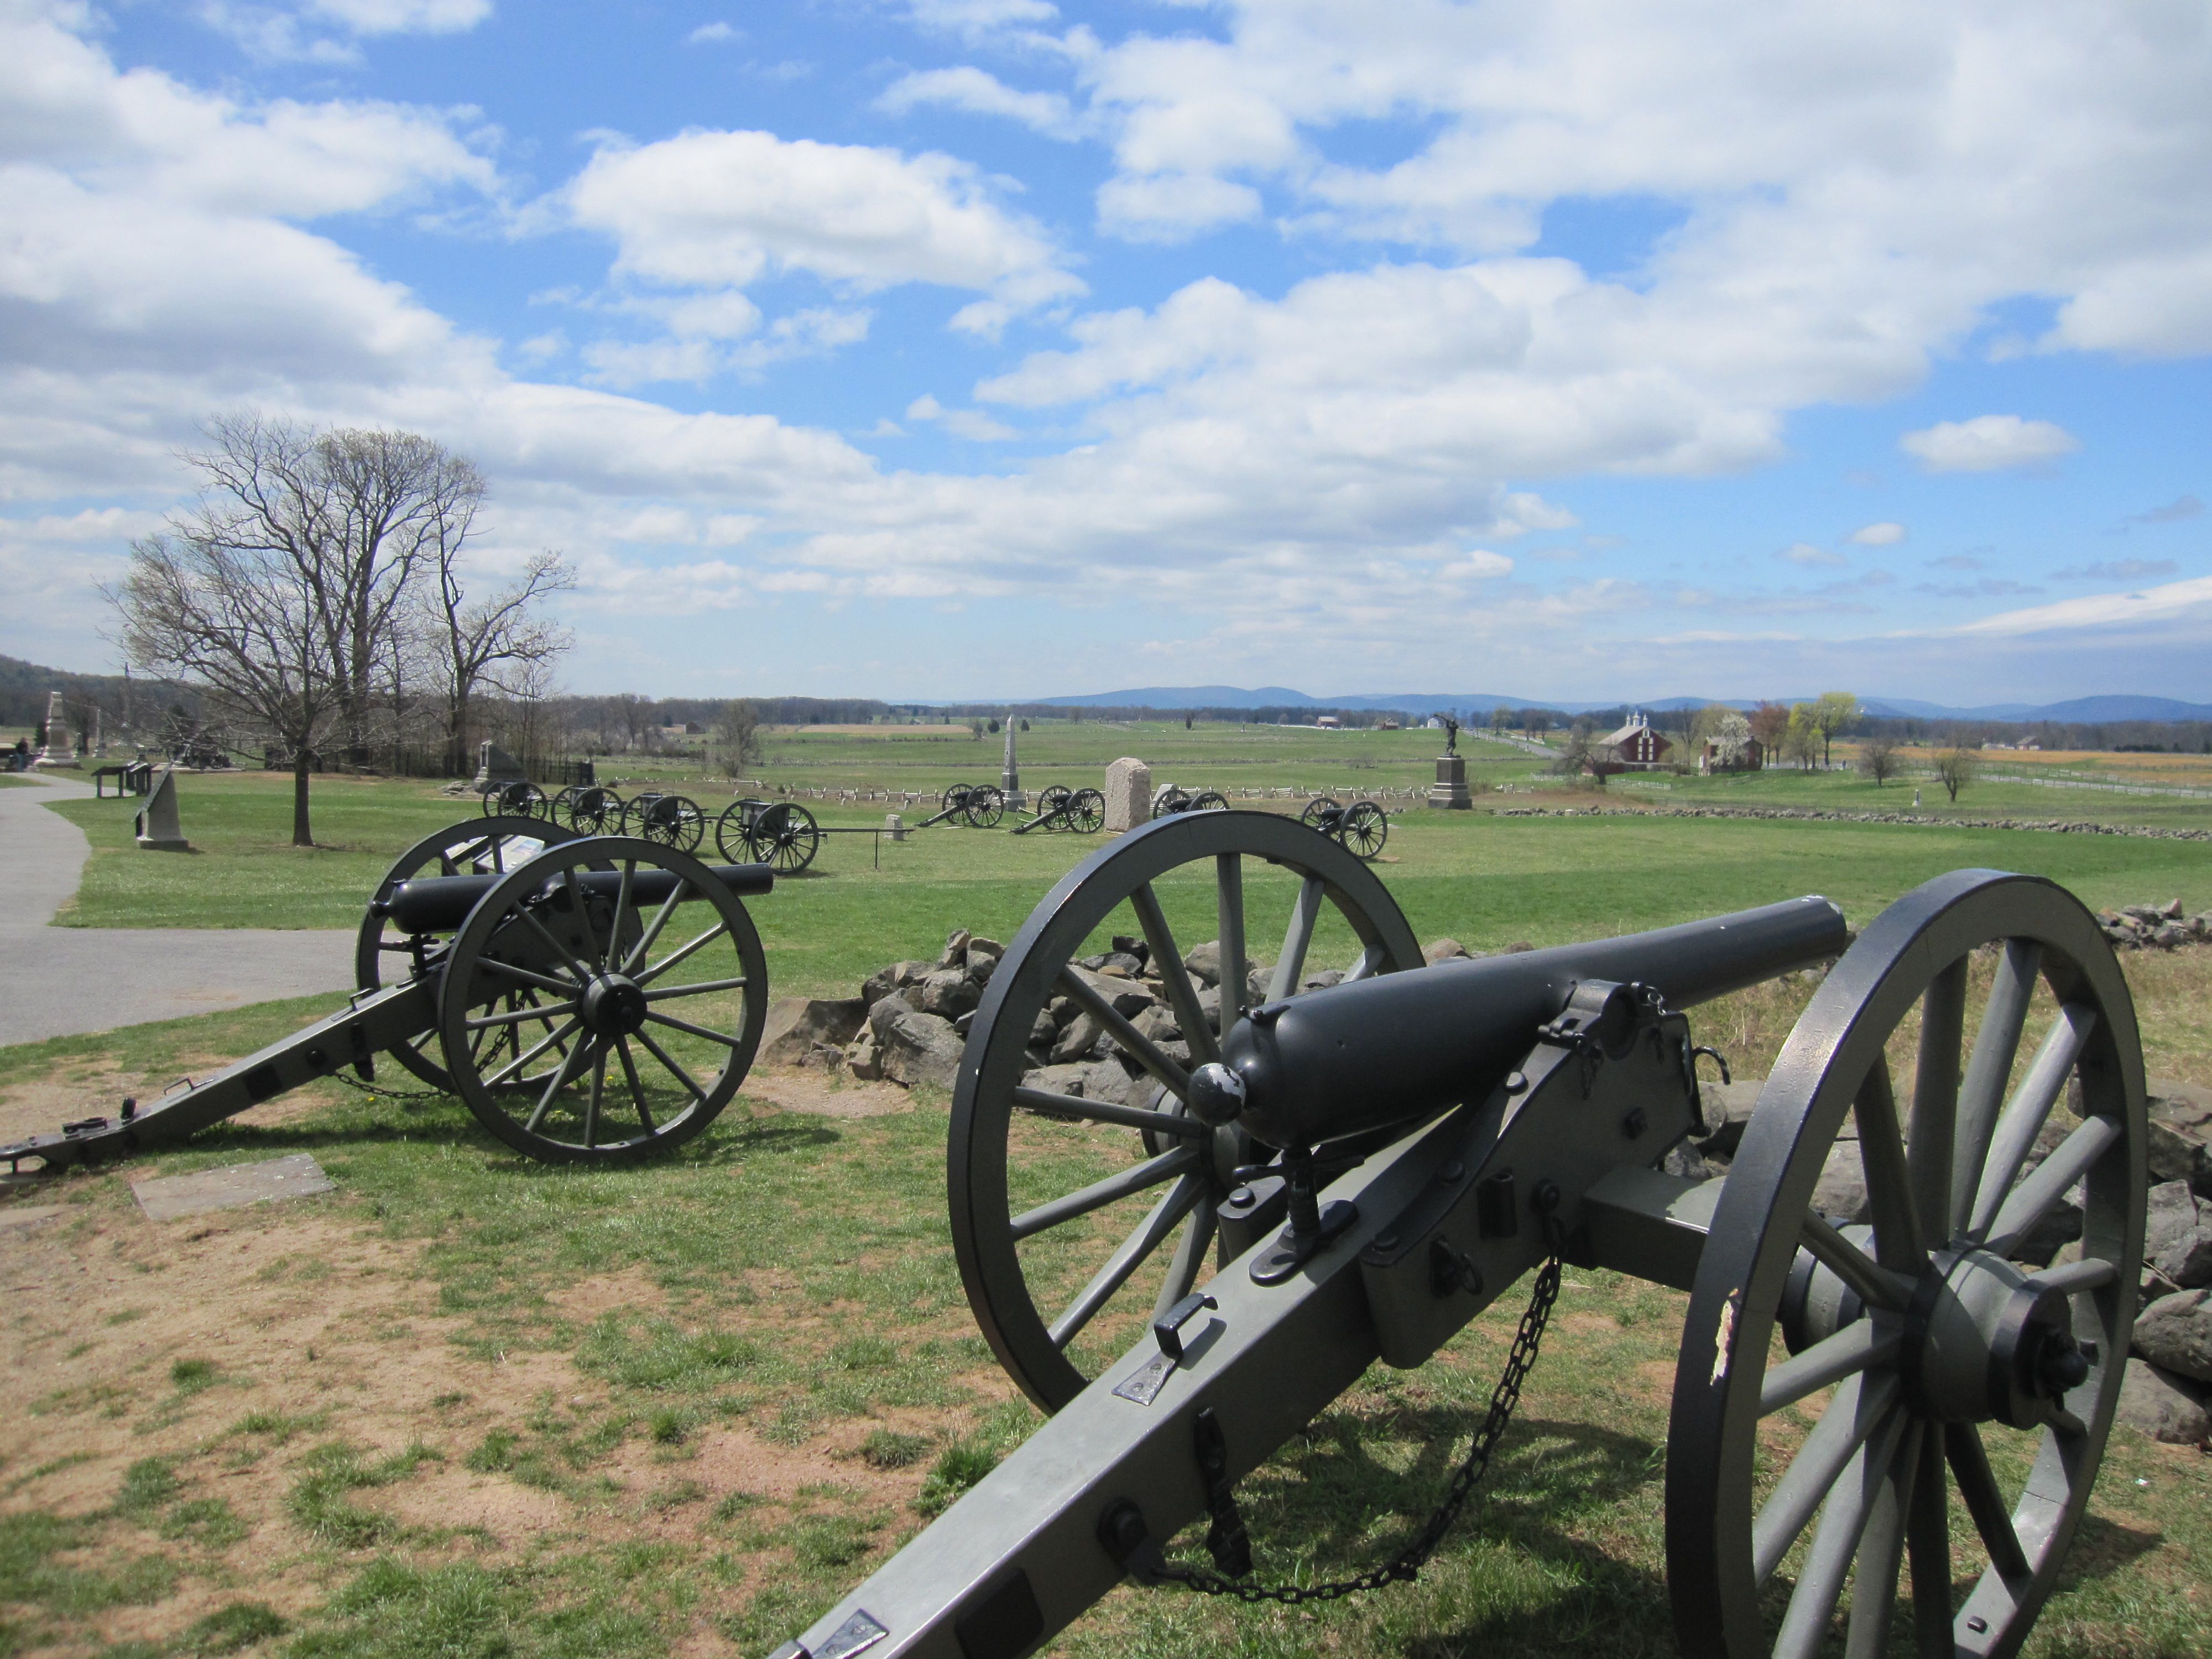 Best National Parks for Families: Gettysburg